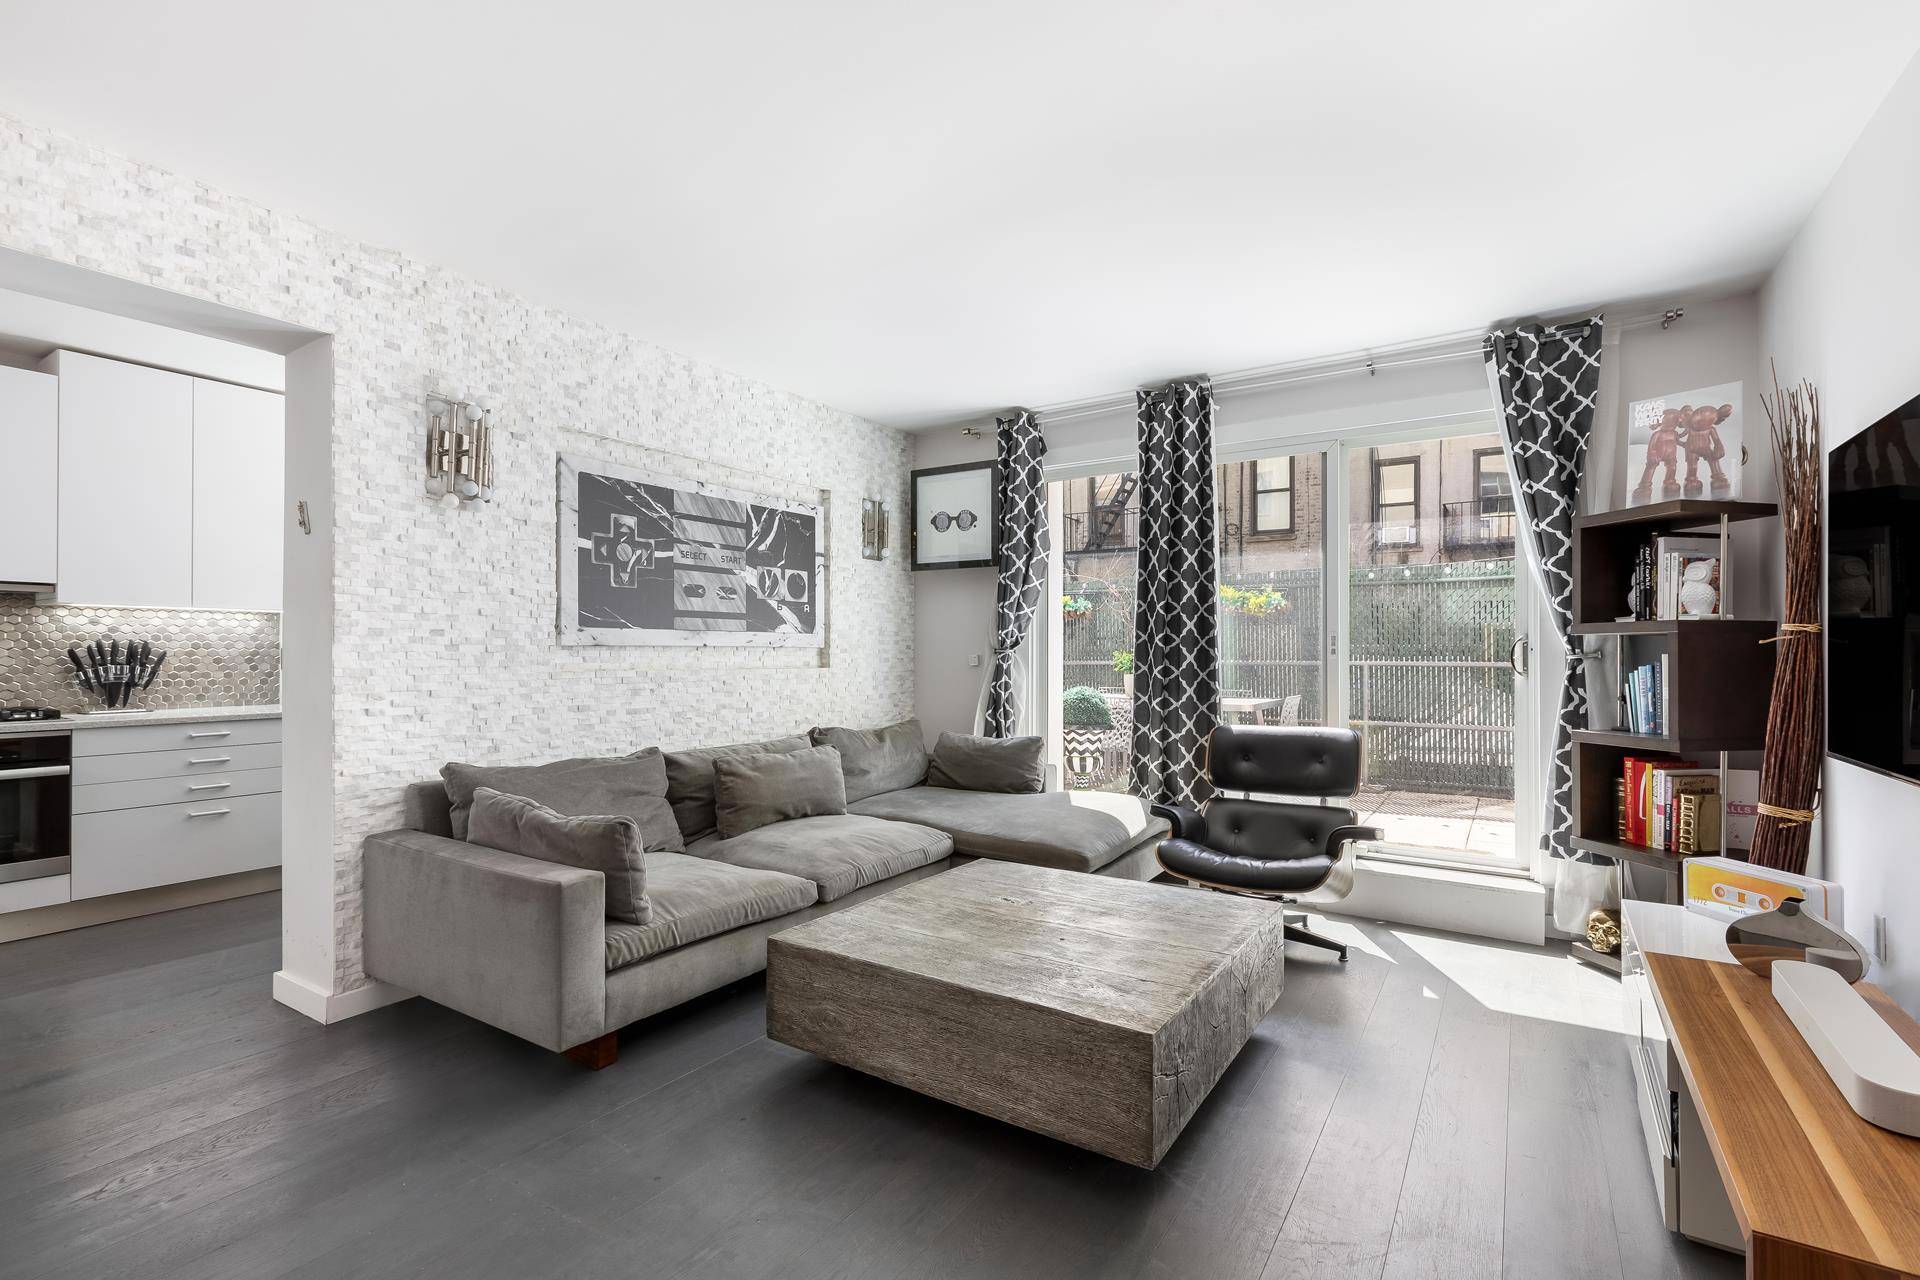 This spacious 750sf 1BR 1Bath apartment sports a spectacular 400sf private landscaped terrace, making it the perfect East Village oasis.